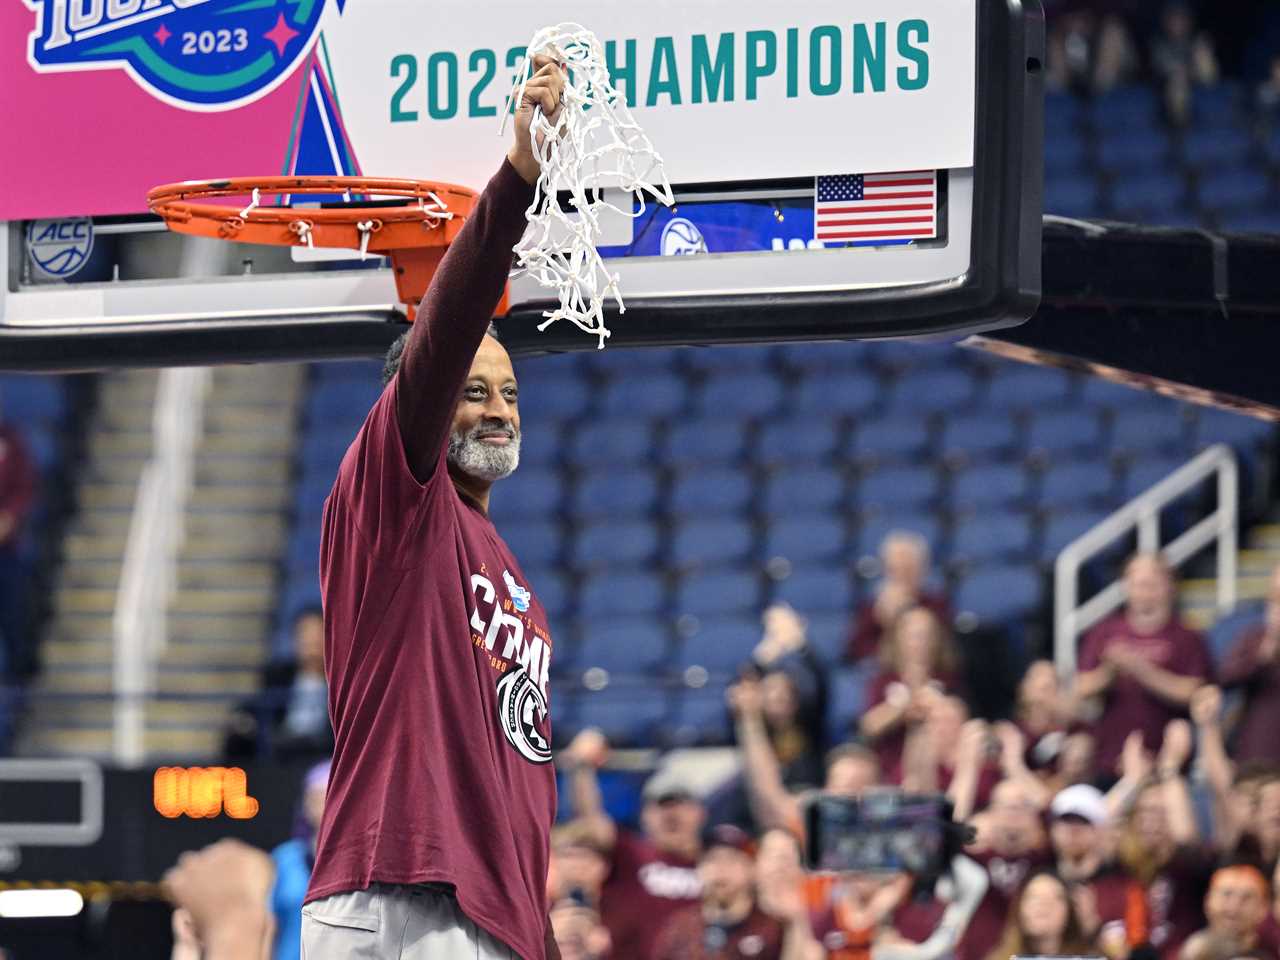 Black coaches to watch in the NCAA women’s tournament Rising star Alex Simmons, Dawn Staley and Kenny Brooks are among the coaches to know on 11 teams